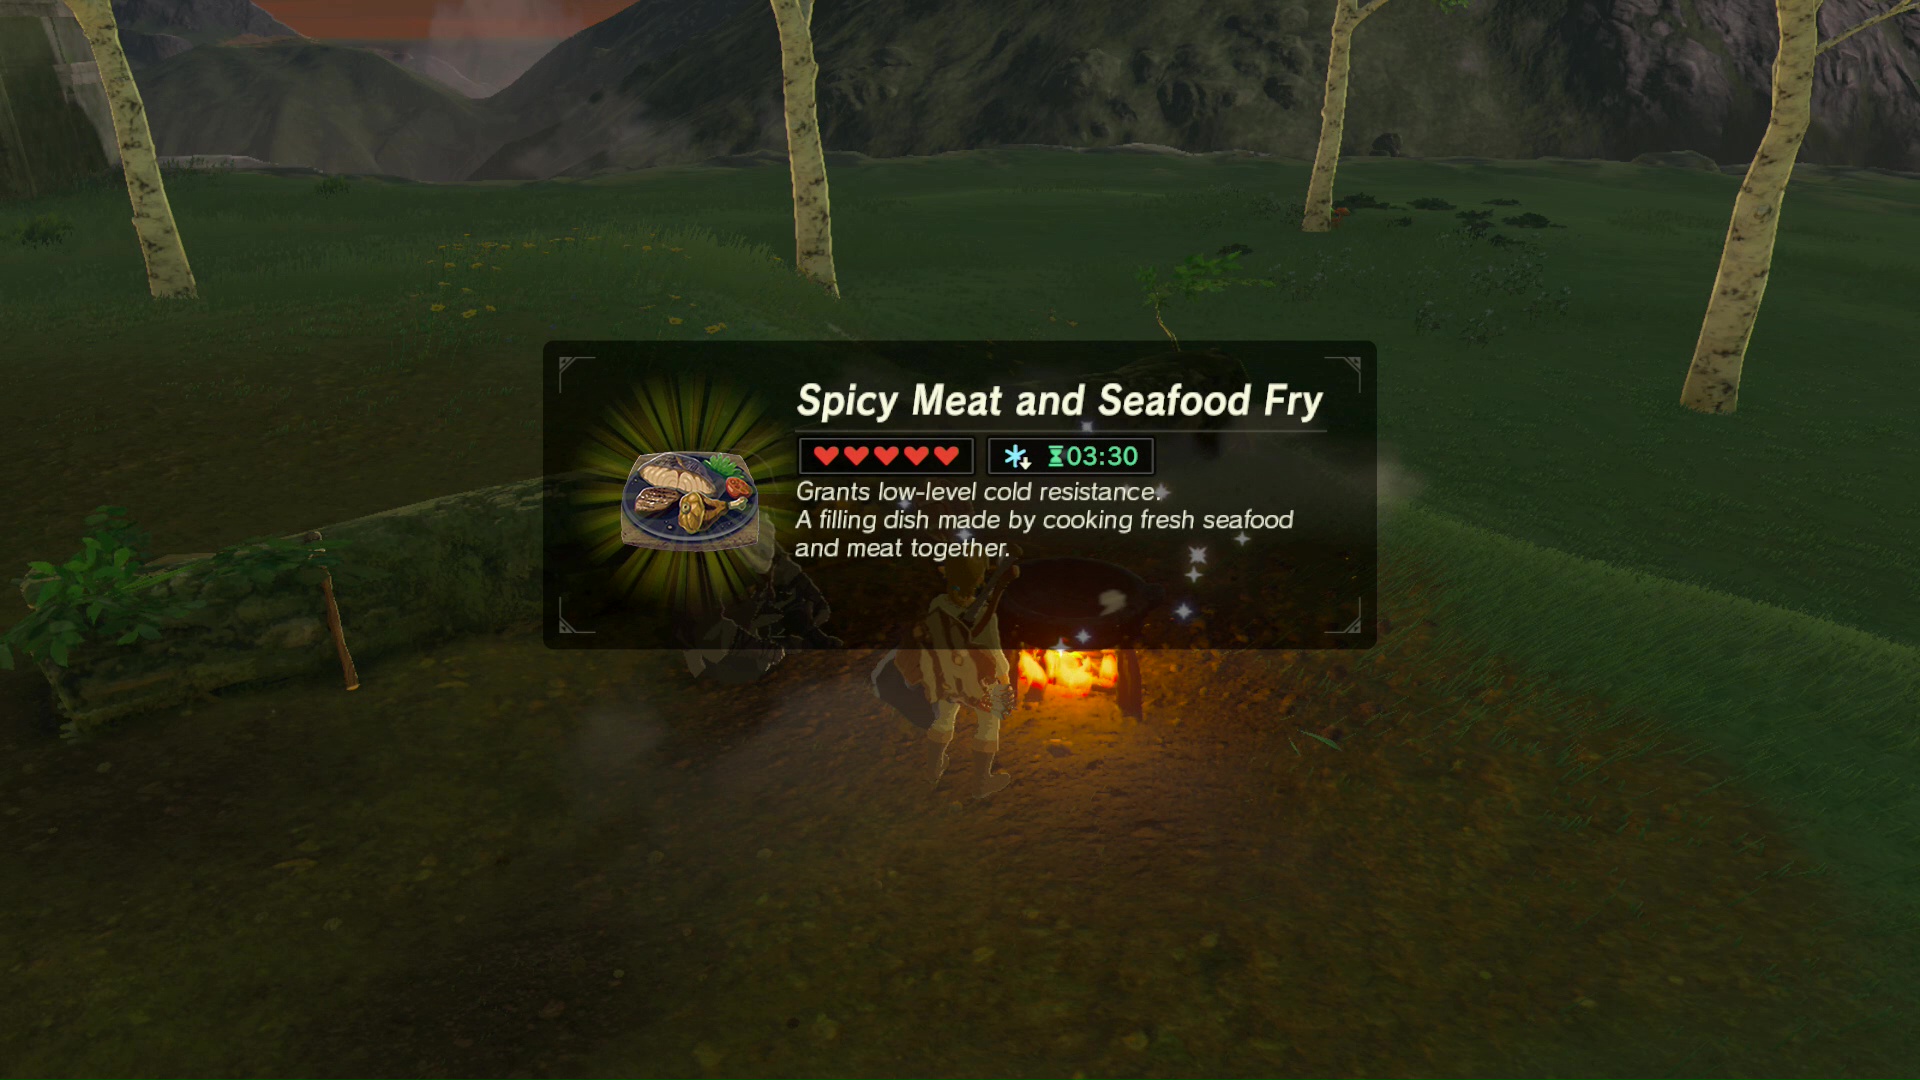 Botw spicy meat and seafood